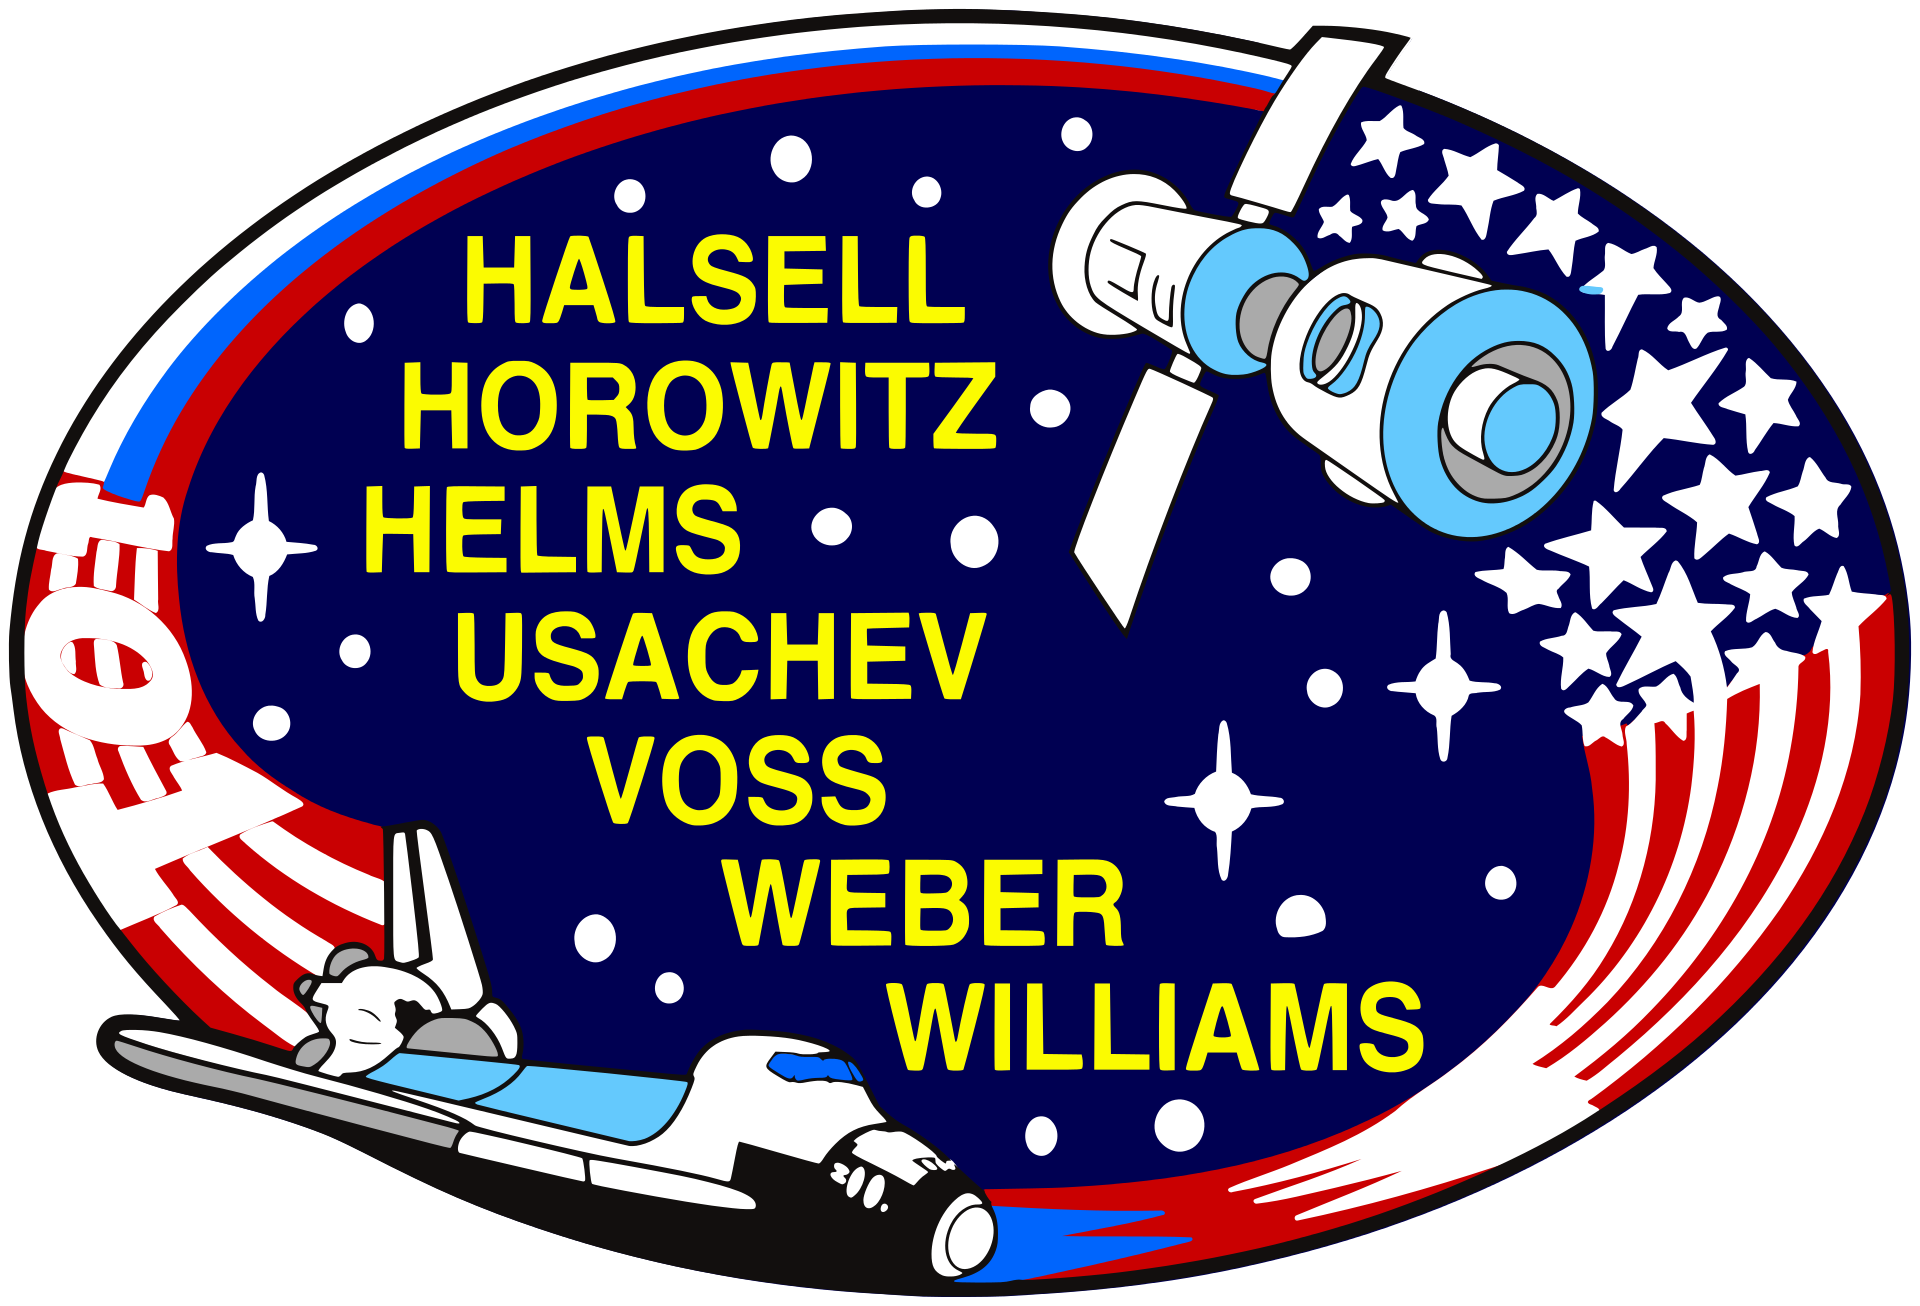 Mission patch for STS-101